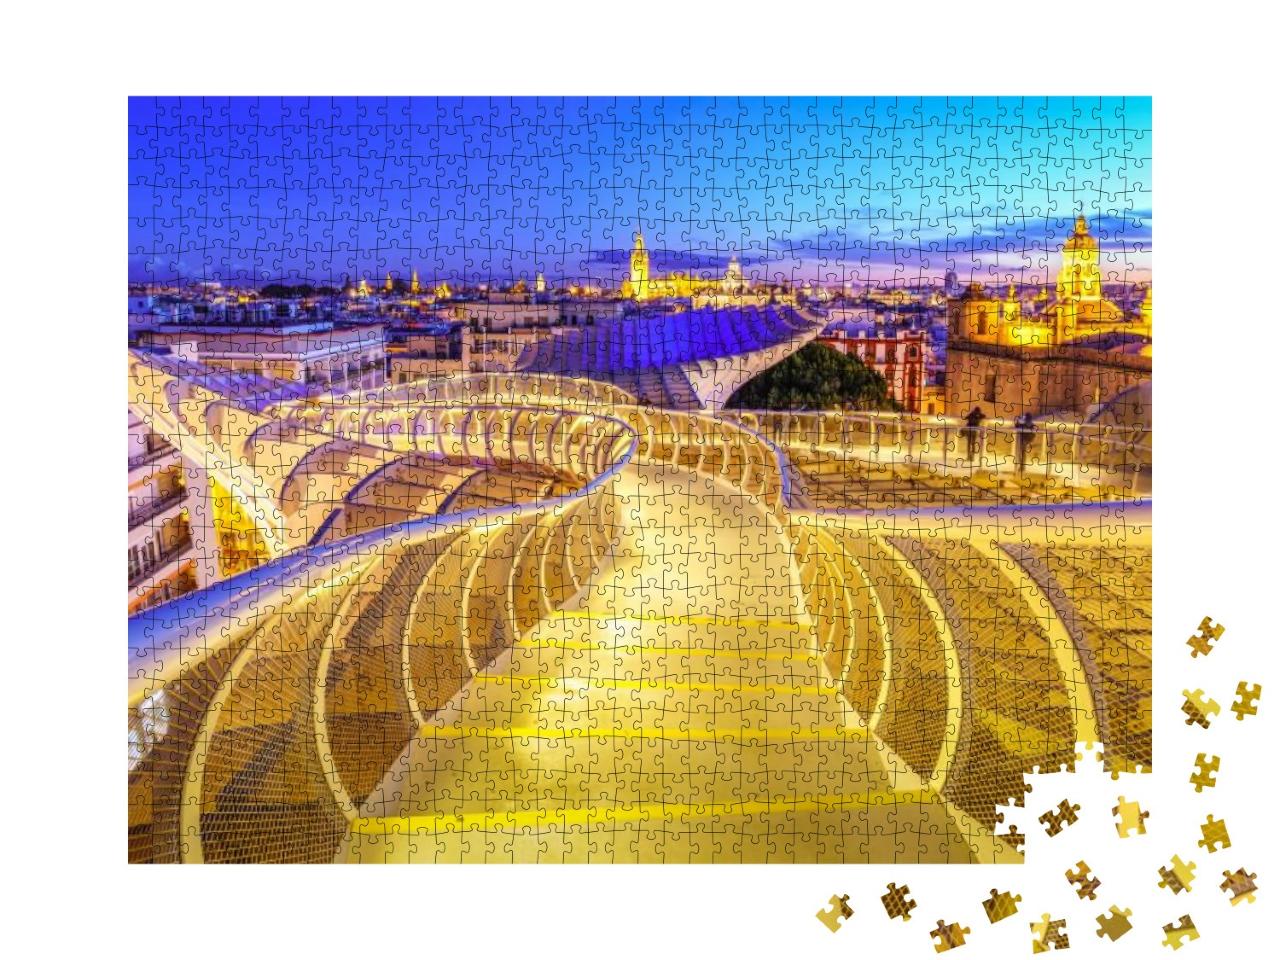 From the Top of the Space Metropol Parasol Setas De Sevil... Jigsaw Puzzle with 1000 pieces